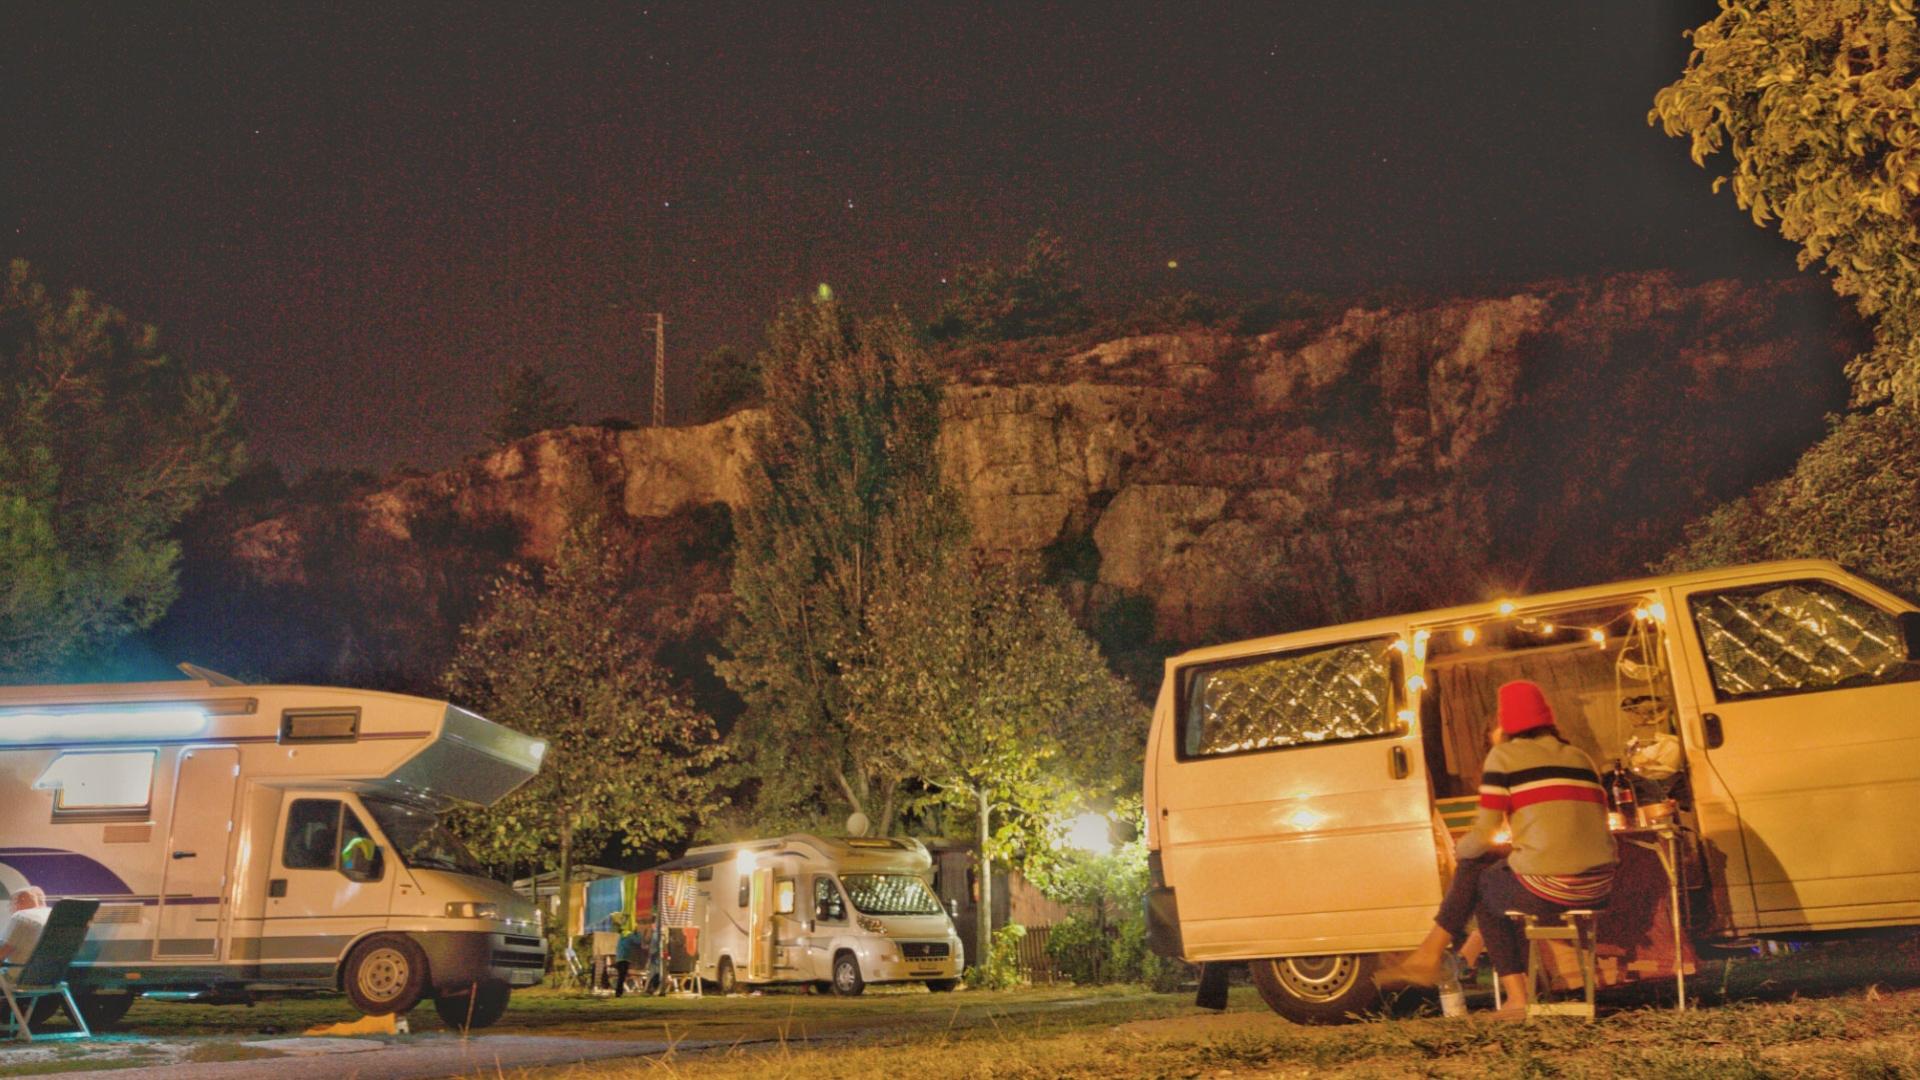 Night camping with RVs and a person sitting near a lit van.